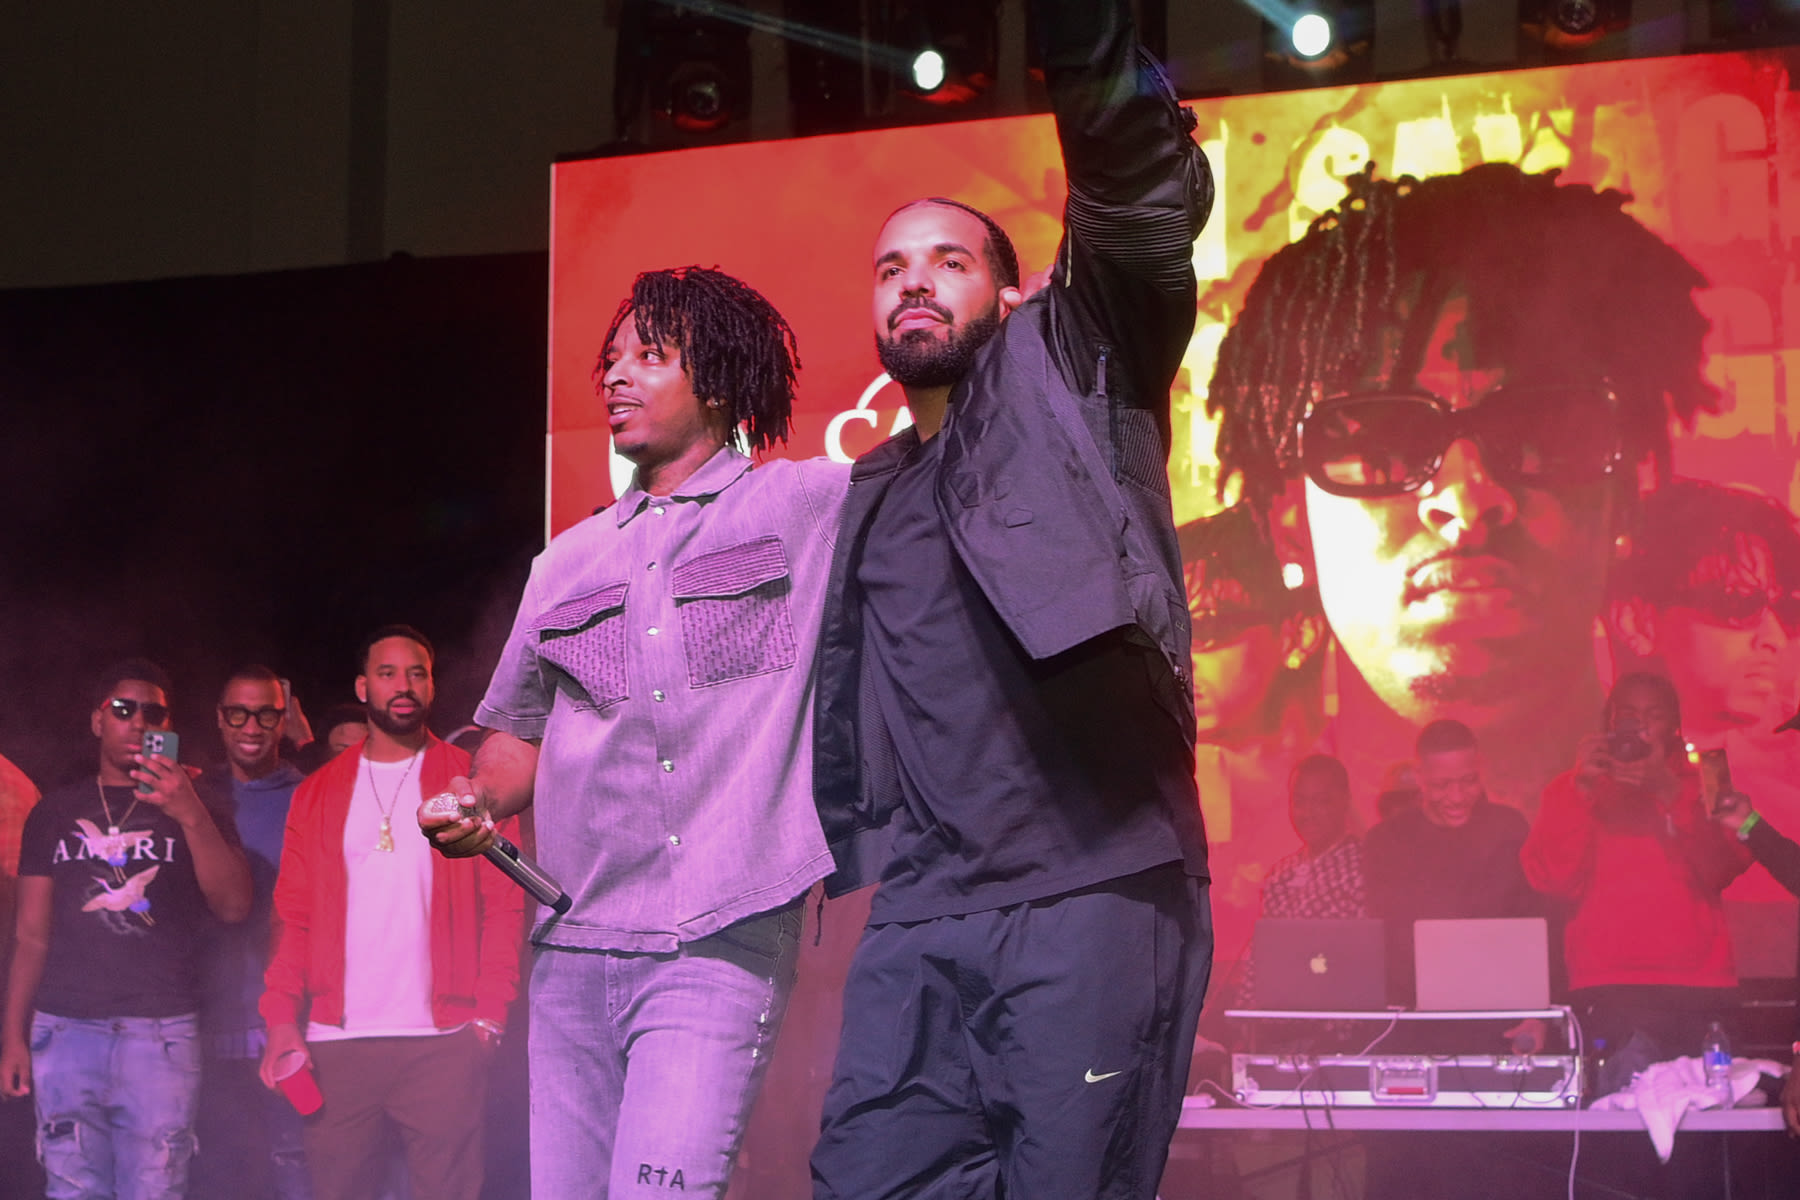 Drake Joins 21 Savage Onstage During Toronto Show: ‘You Home, Right?’